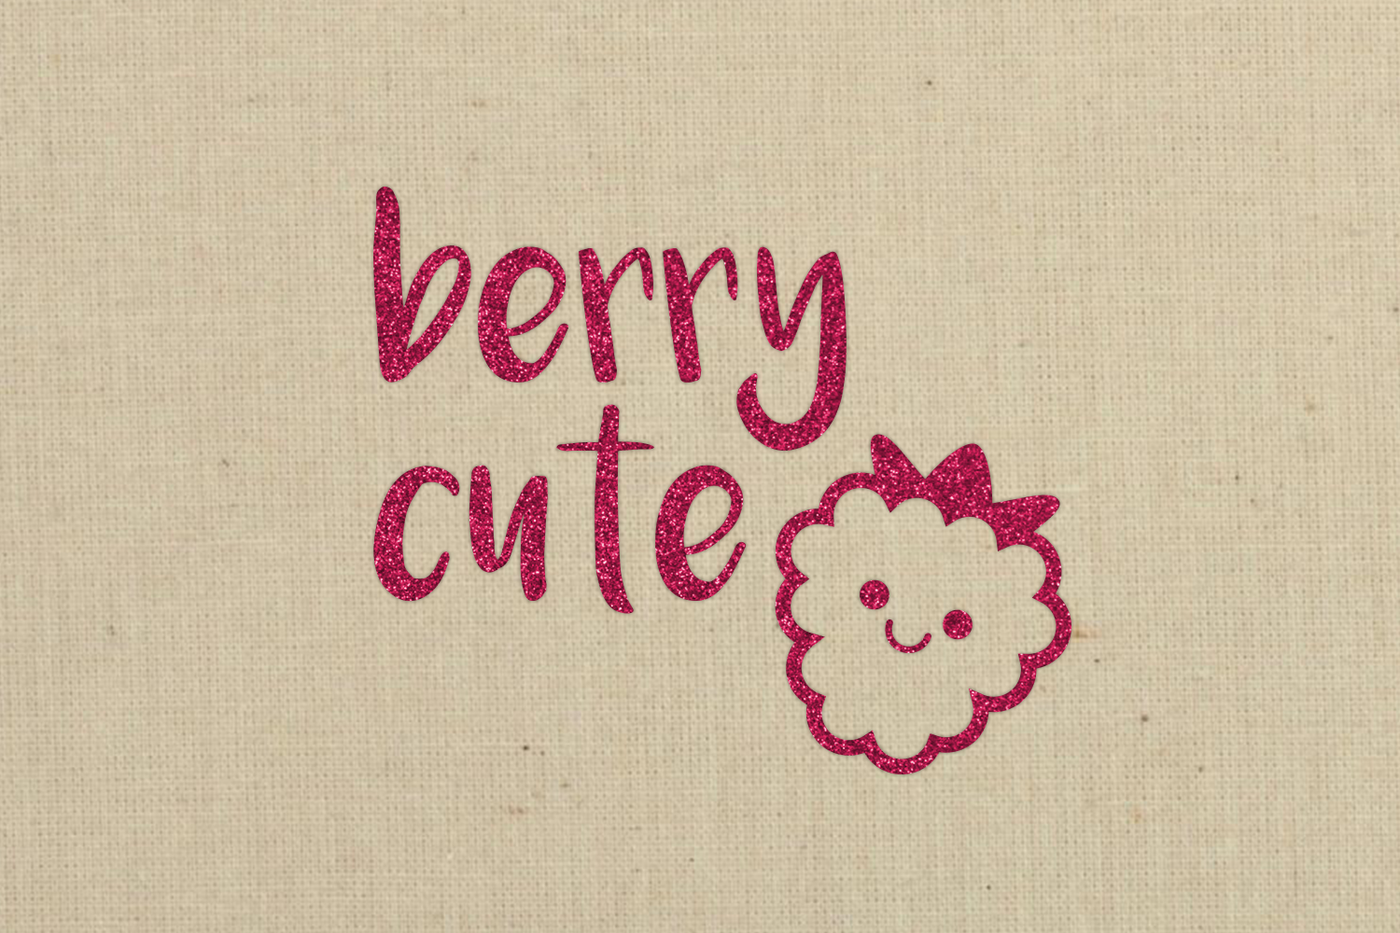 Beige fabric with fuchsia glitter vinyl design. Design says "berry cute" with a smiling raspberry.